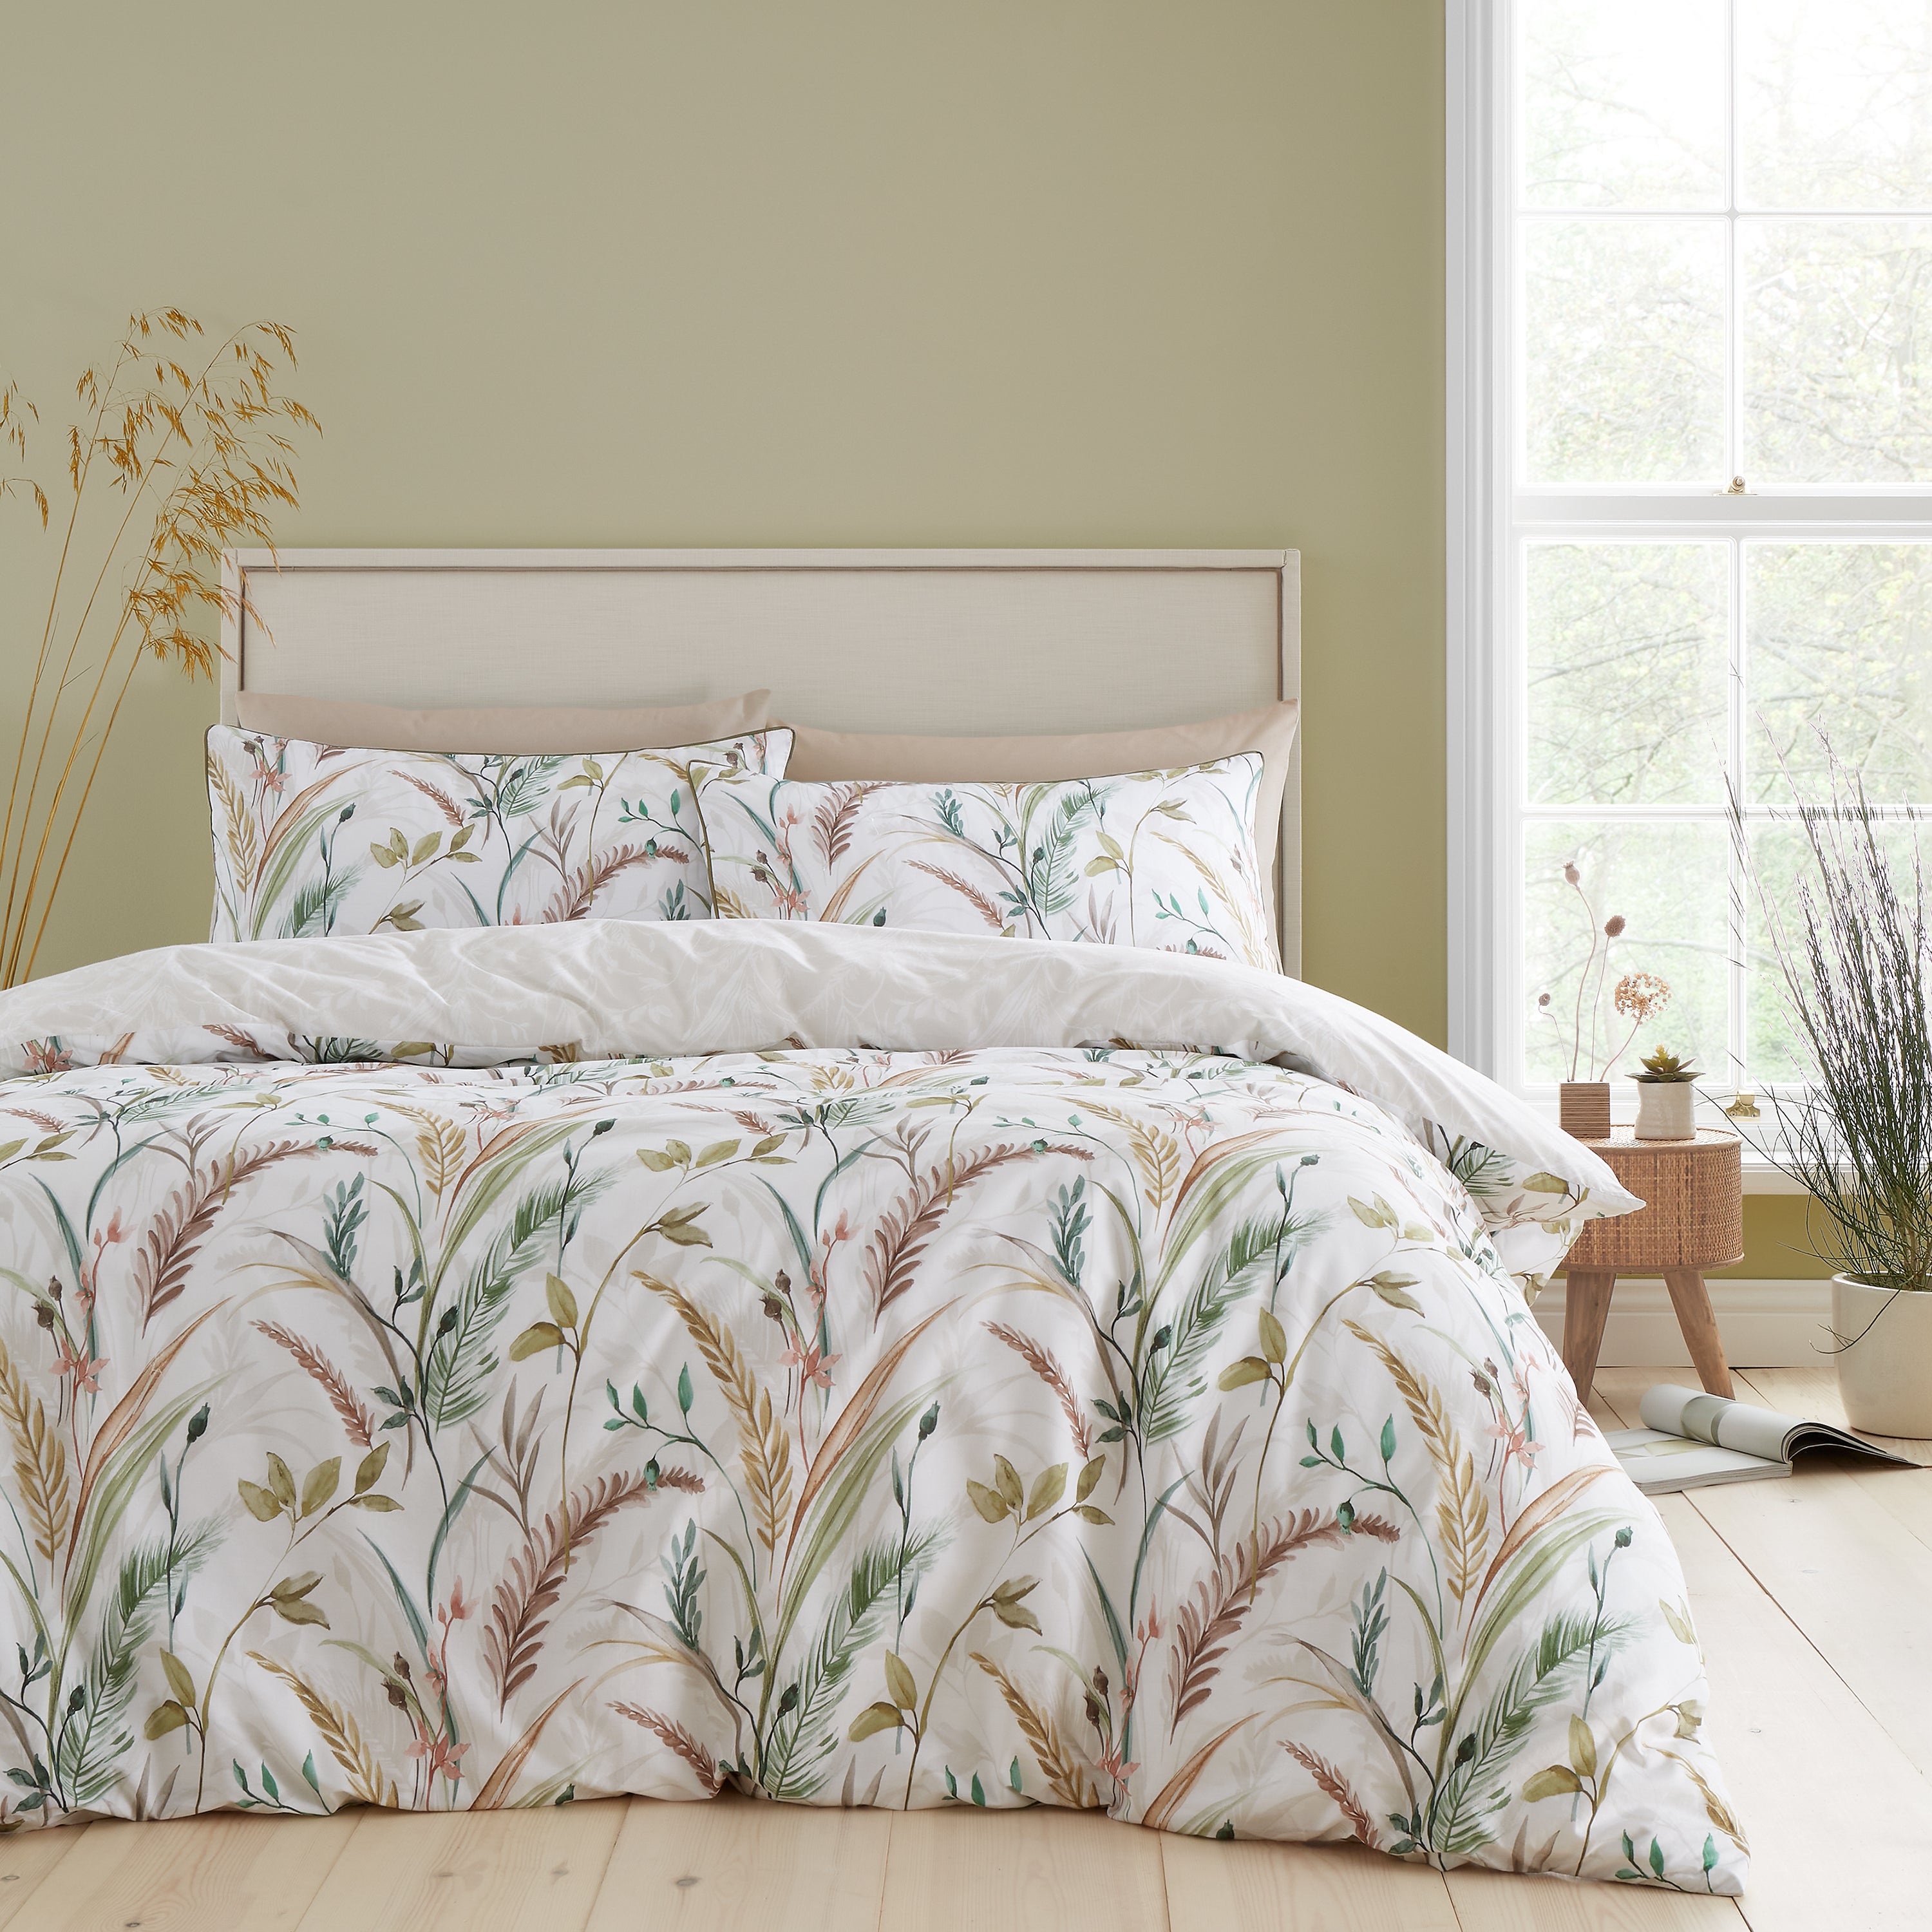 RHS Ornamental Grasses 200 Thread Count Natural Cotton Reversible Duvet Cover and Pillowcase Set